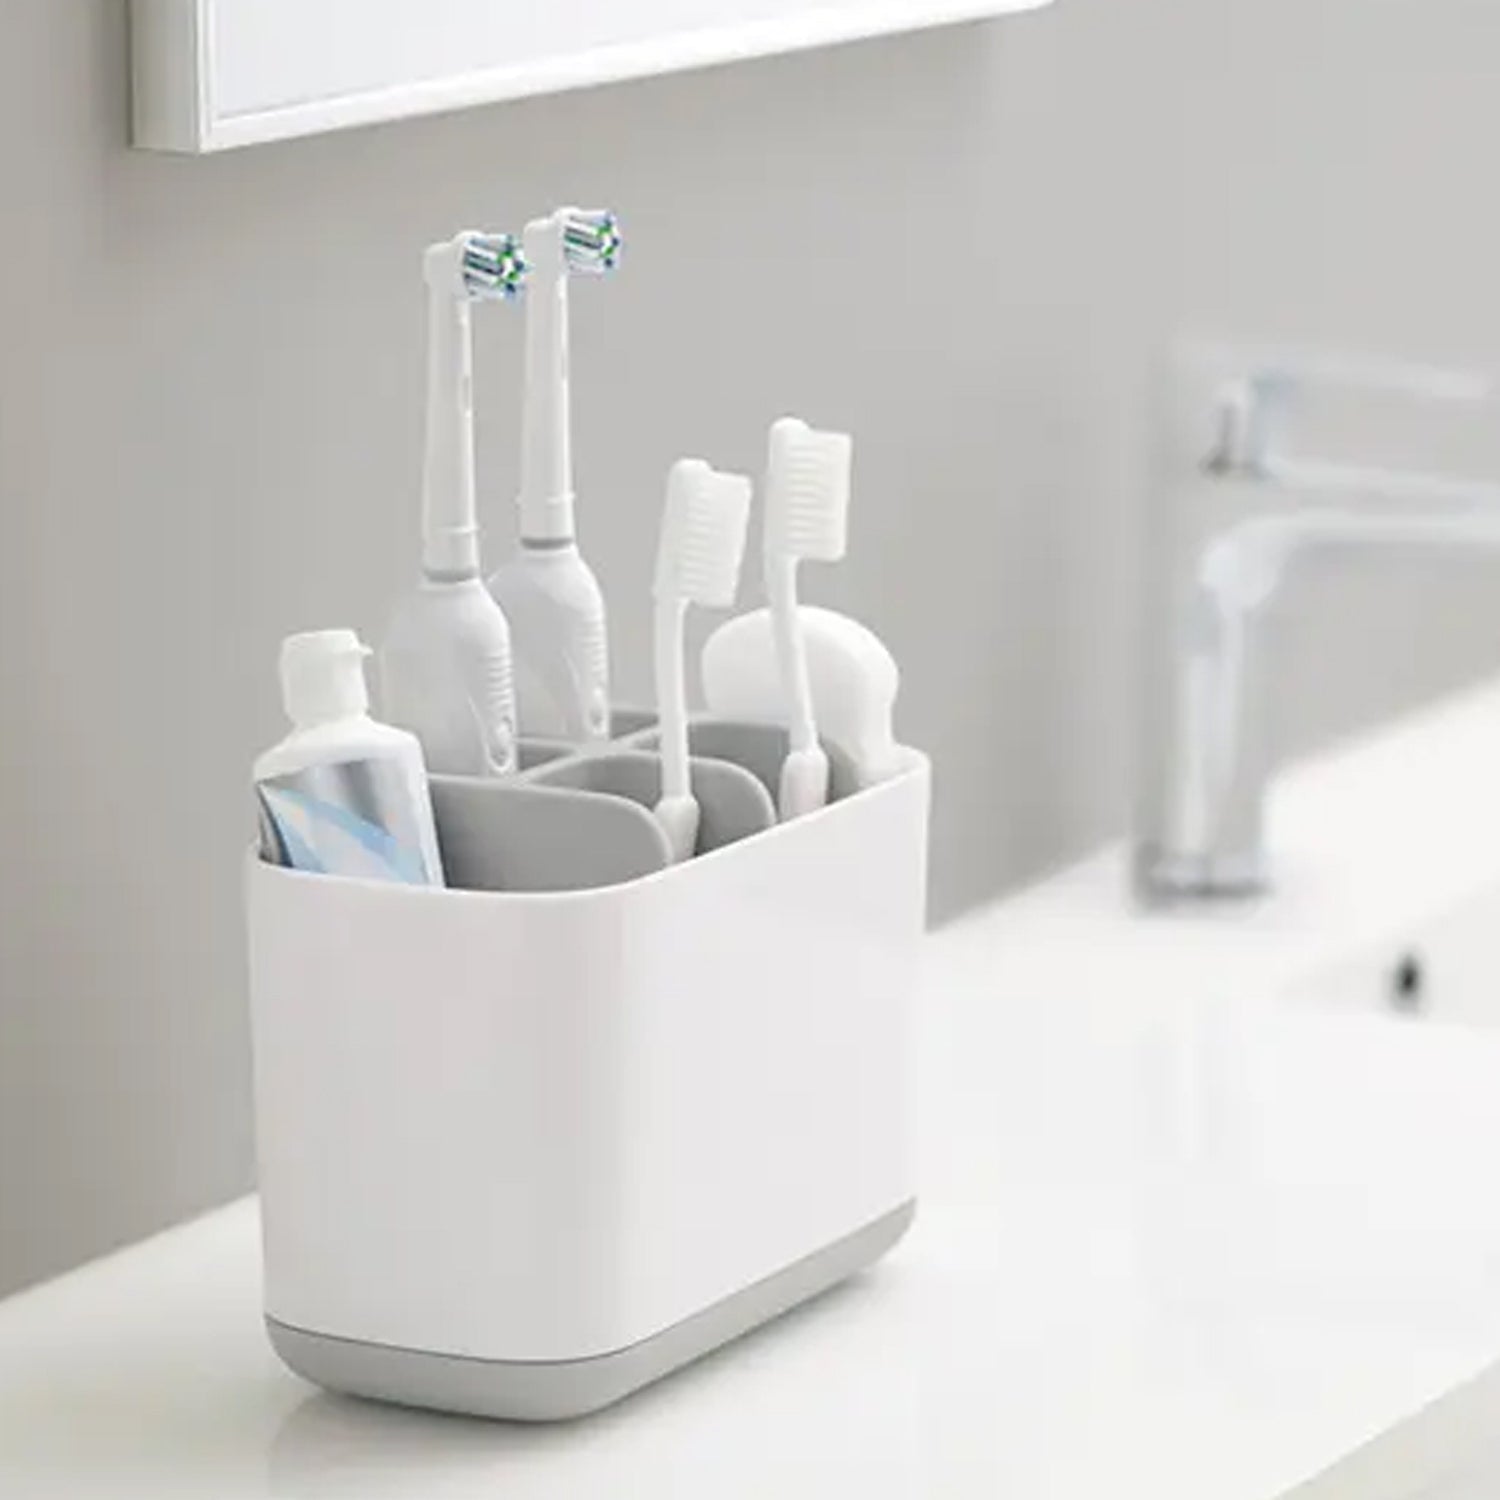 7698 Toothbrush Holder Stand Bathroom Storage Organizer Caddy For Toothpaste, Tongue Cleaner, Toiletry, and Razor Shaving Kit Holder JK Trends